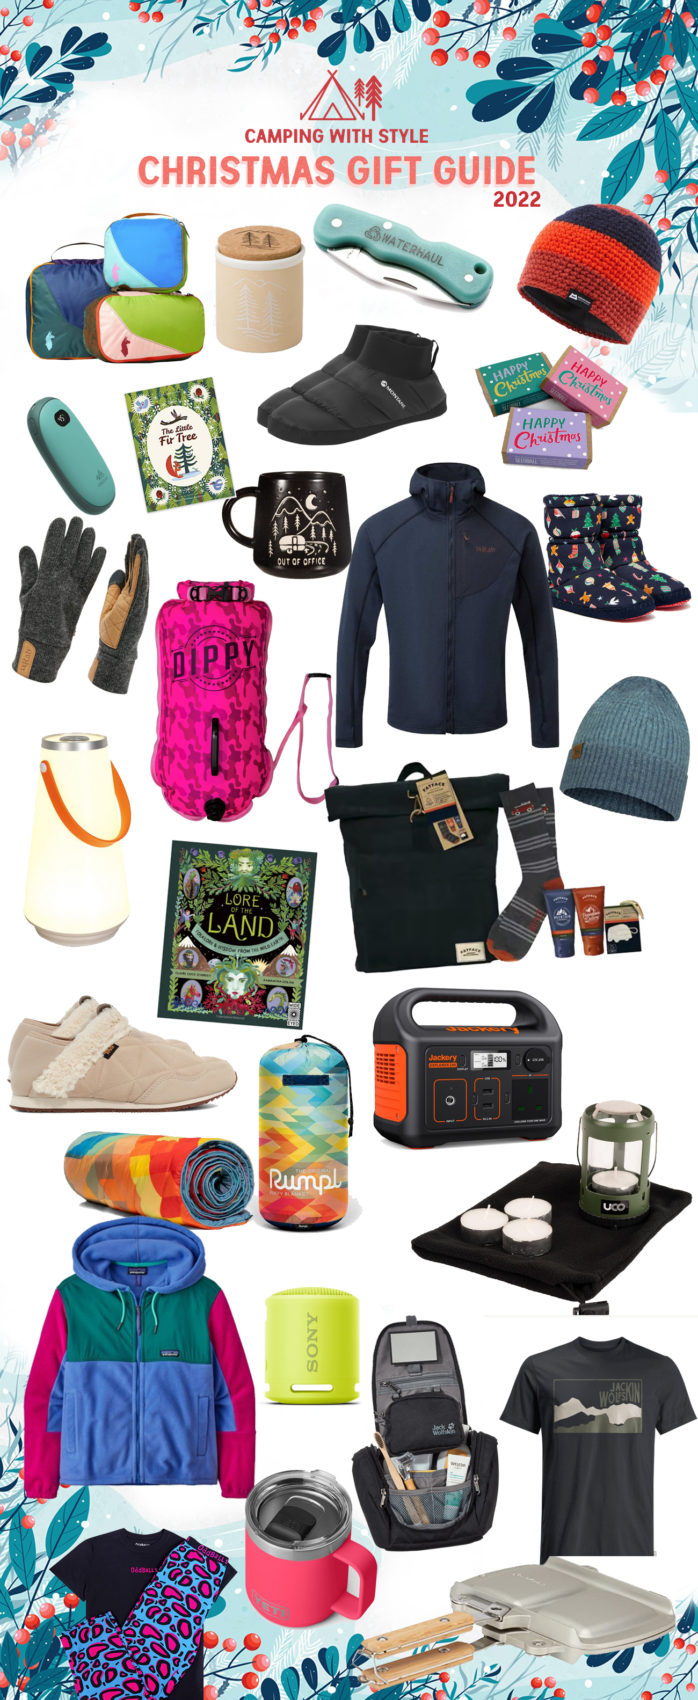 Christmas Gifting Guide 2022 Camping, Travel & Outdoors Gifts